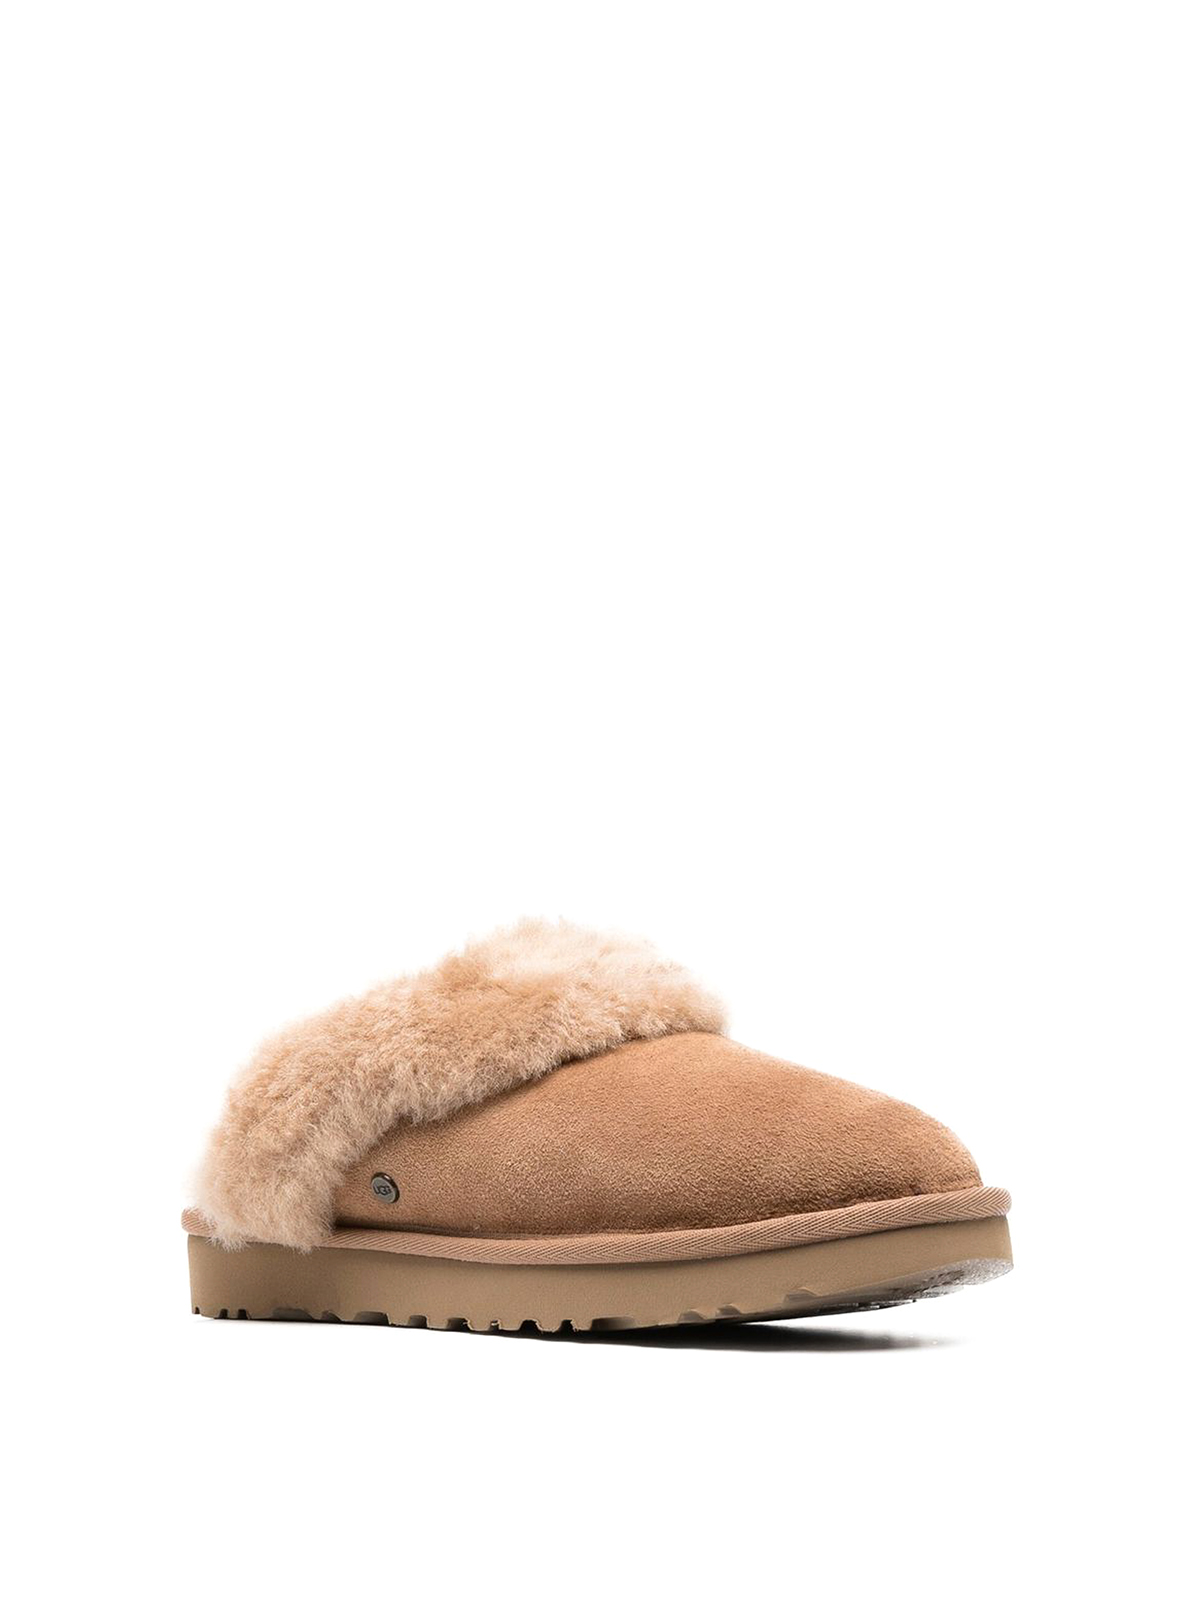 paraplu deze vergroting Loafers & Slippers Ugg - Shearling-trim slippers - 1130876WCHESTNUT